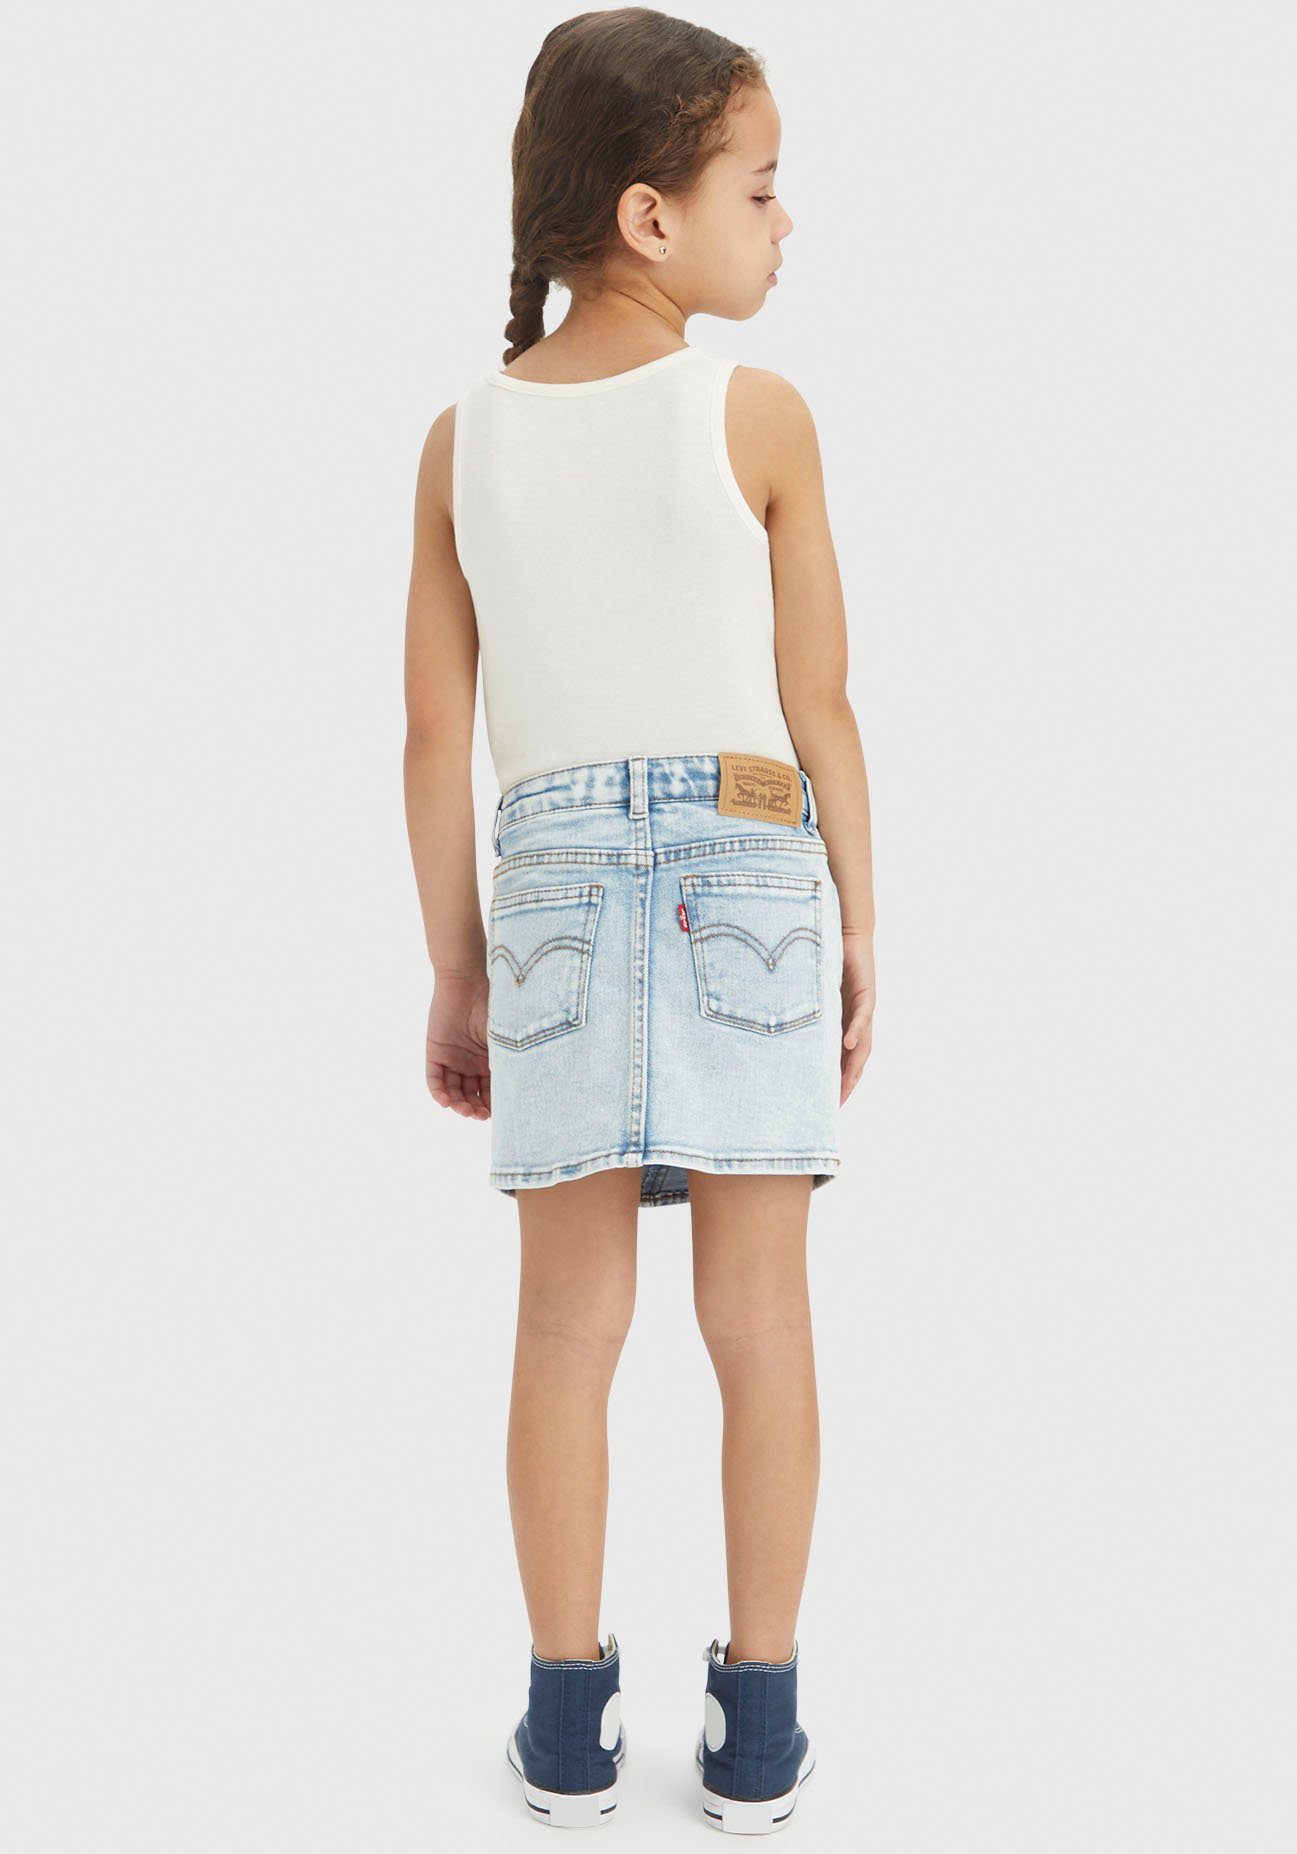 for Jeansrock HIGH down DENIM LVG Levi's® GIRLS SKIRT Kids out RISE and